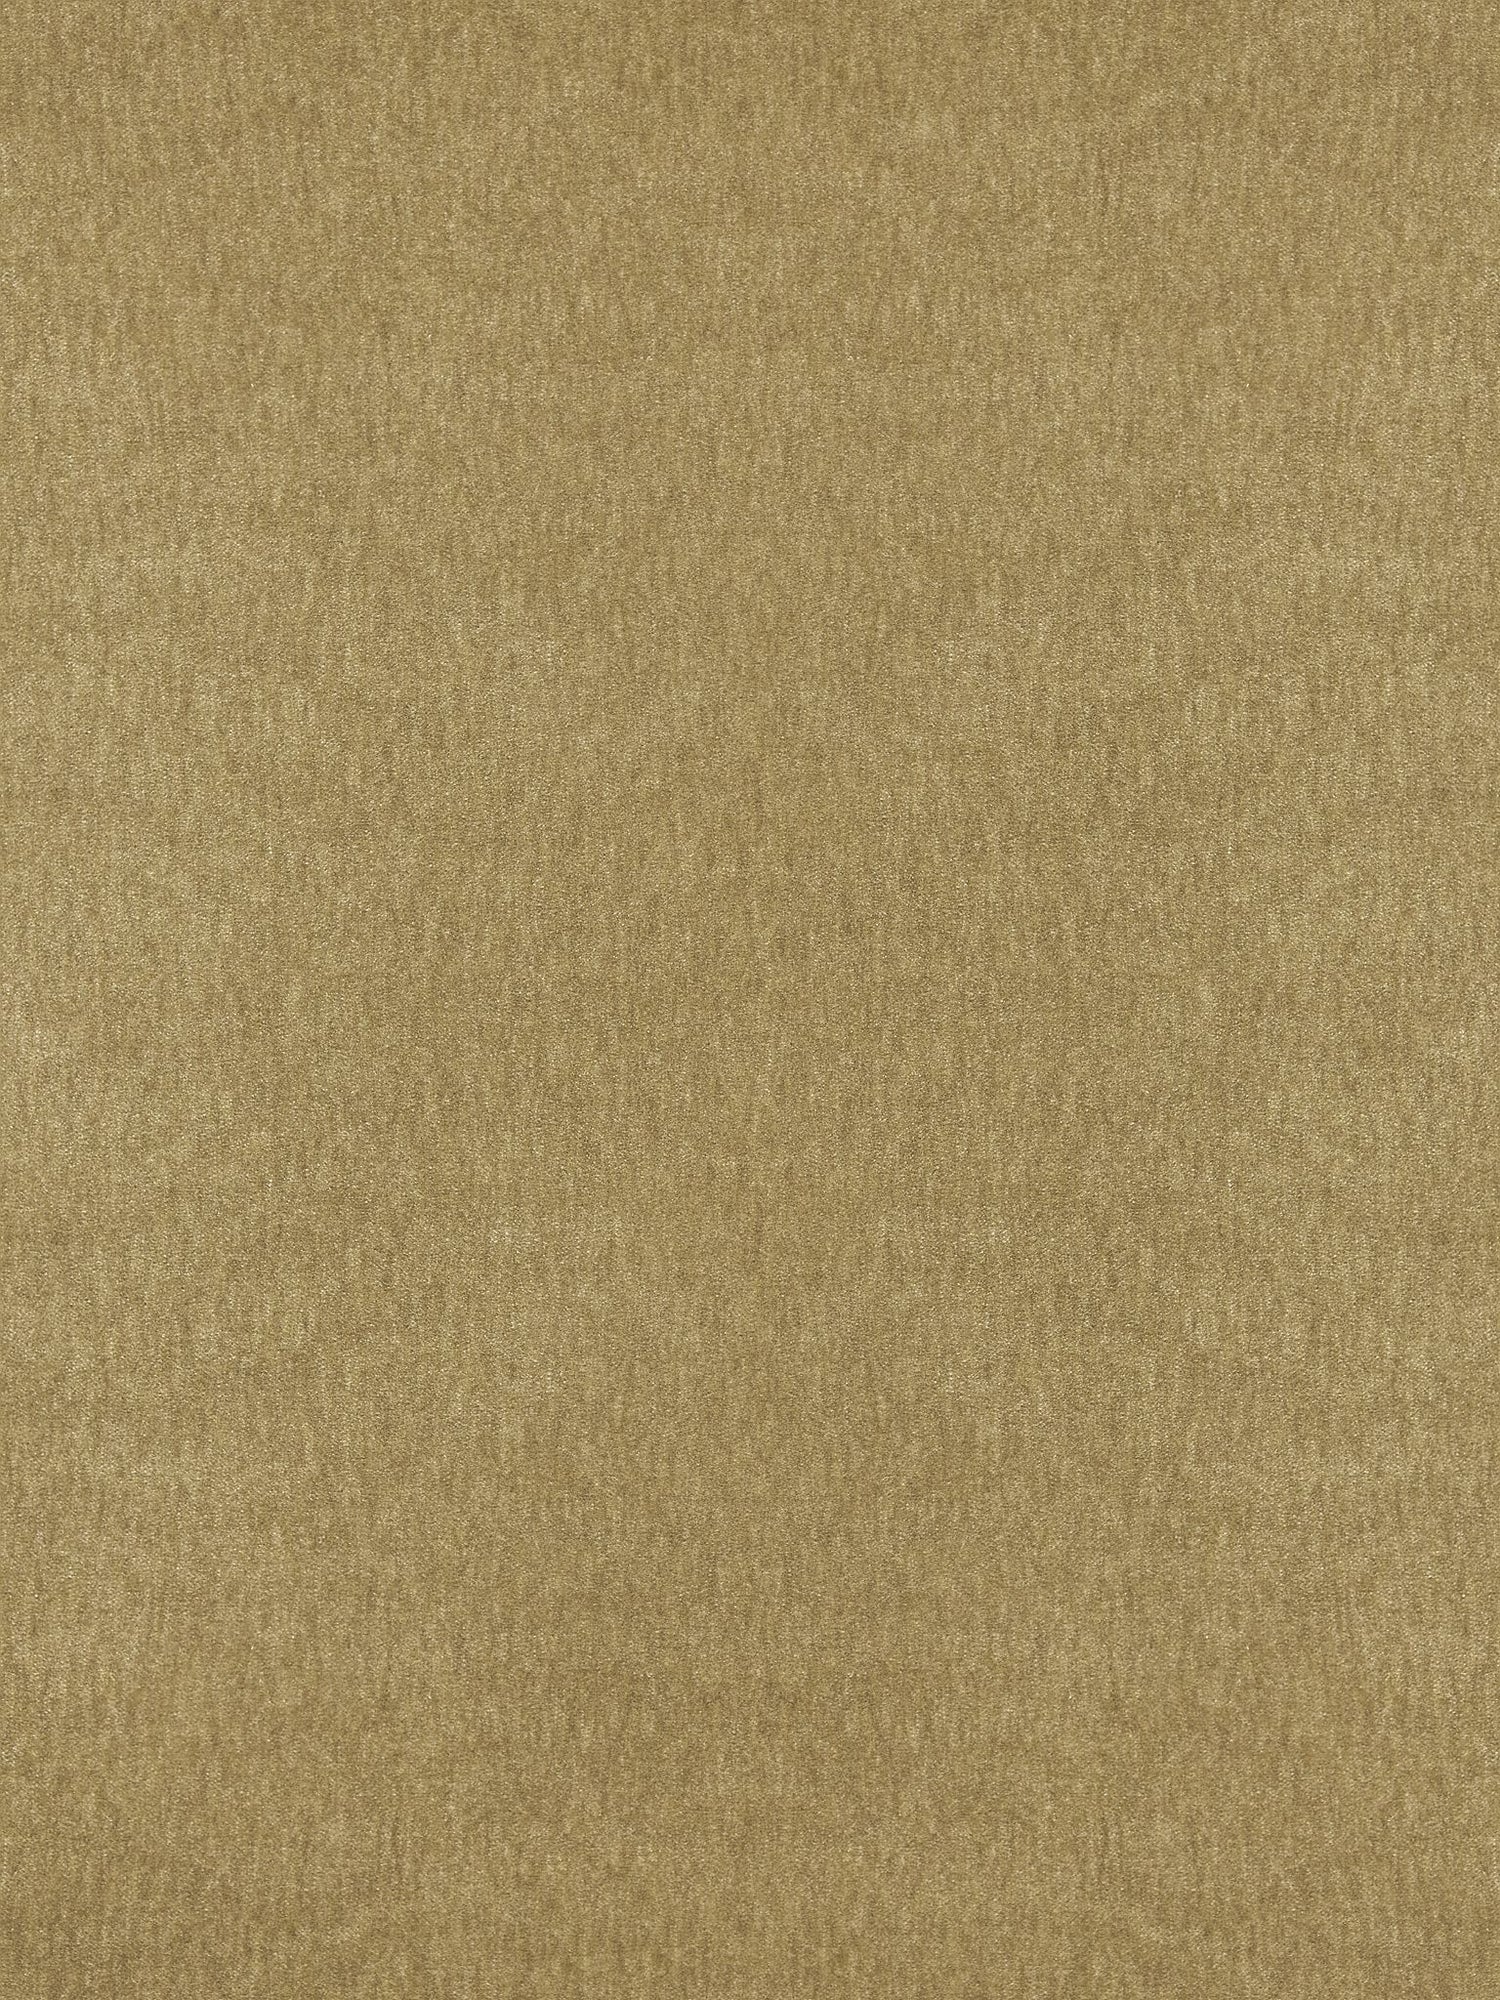 Bay Velvet fabric in sand color - pattern number SC 000227193 - by Scalamandre in the Scalamandre Fabrics Book 1 collection